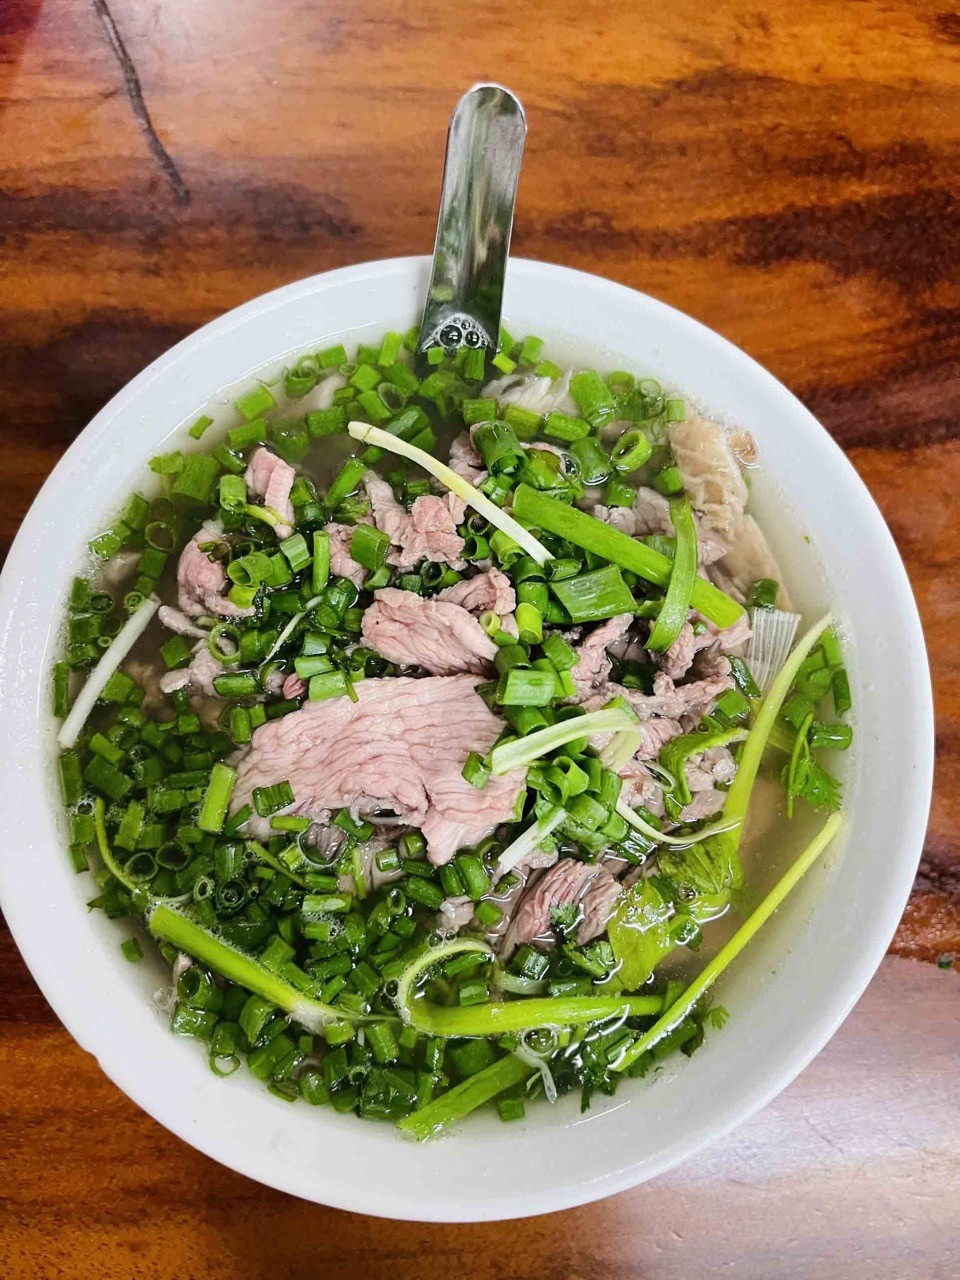 Australian Website Suggests 10 Dishes Must Eat and Drink in Vietnam